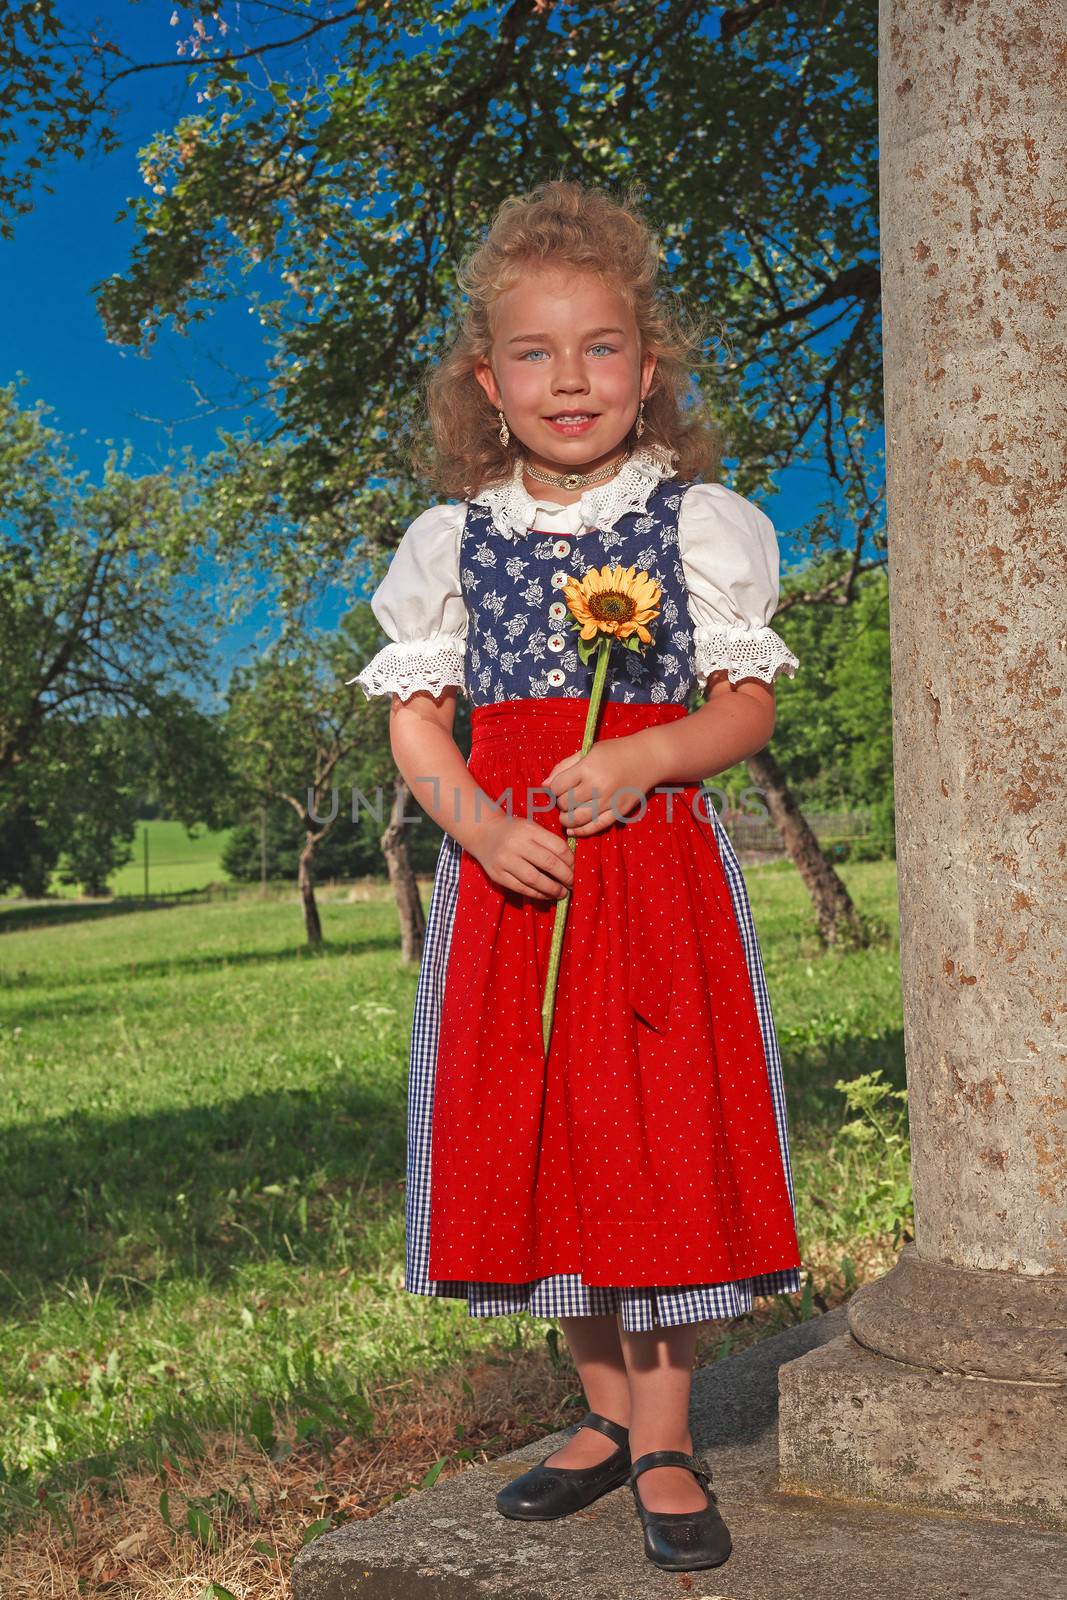 Blond girl in dirndl with blond hair posing with a sunflower in the hands